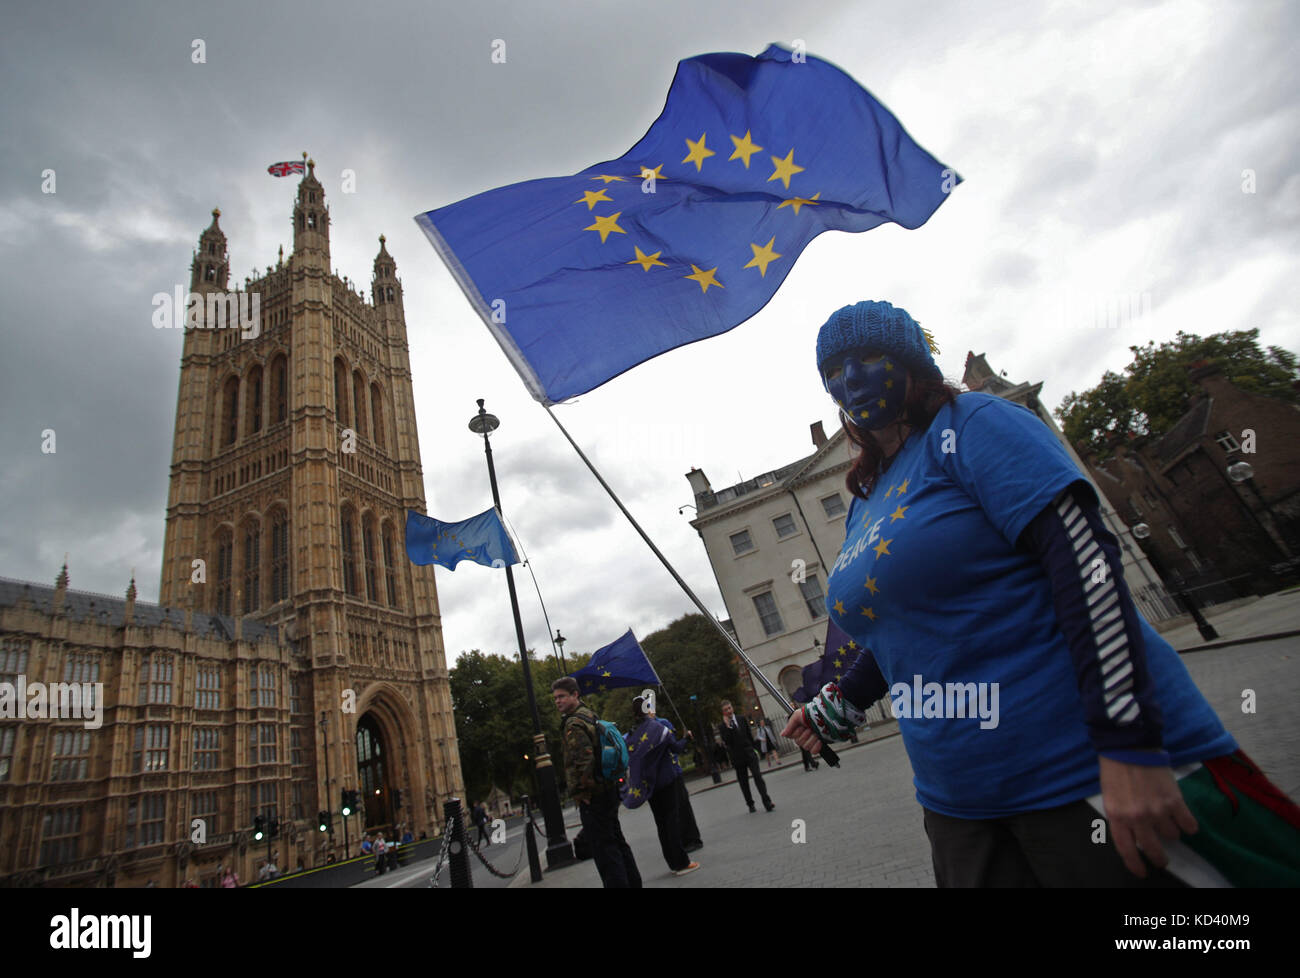 An anti-Brexit protester waves an EU flag outside the Houses of Parliament in London, after Prime Minister Theresa May updated MPs in the House of Commons, London on the Brexit negotiations since her Florence speech last month. Stock Photo